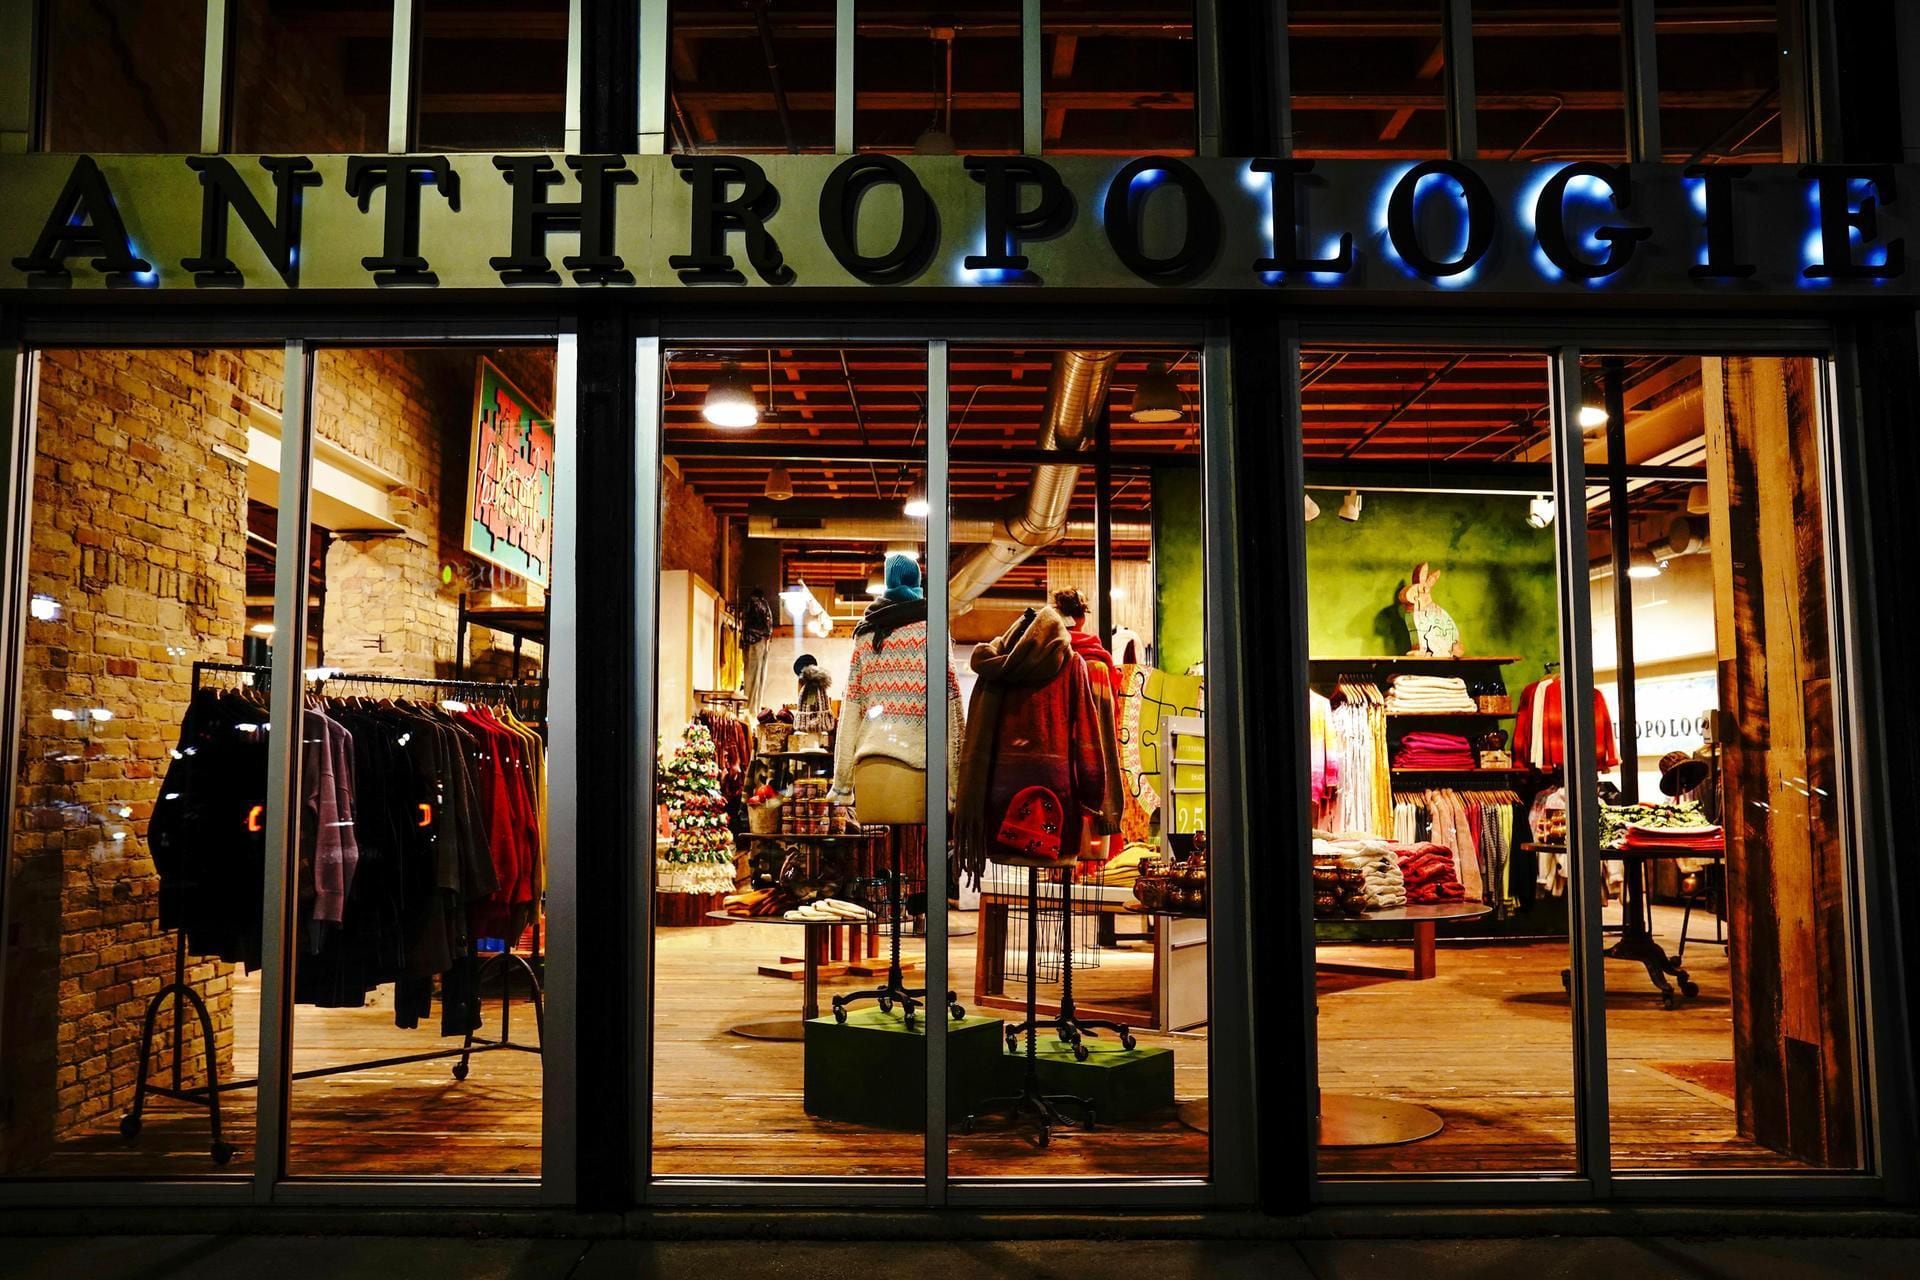 Anthropologie: The American lifestyle brand now ships to Singapore